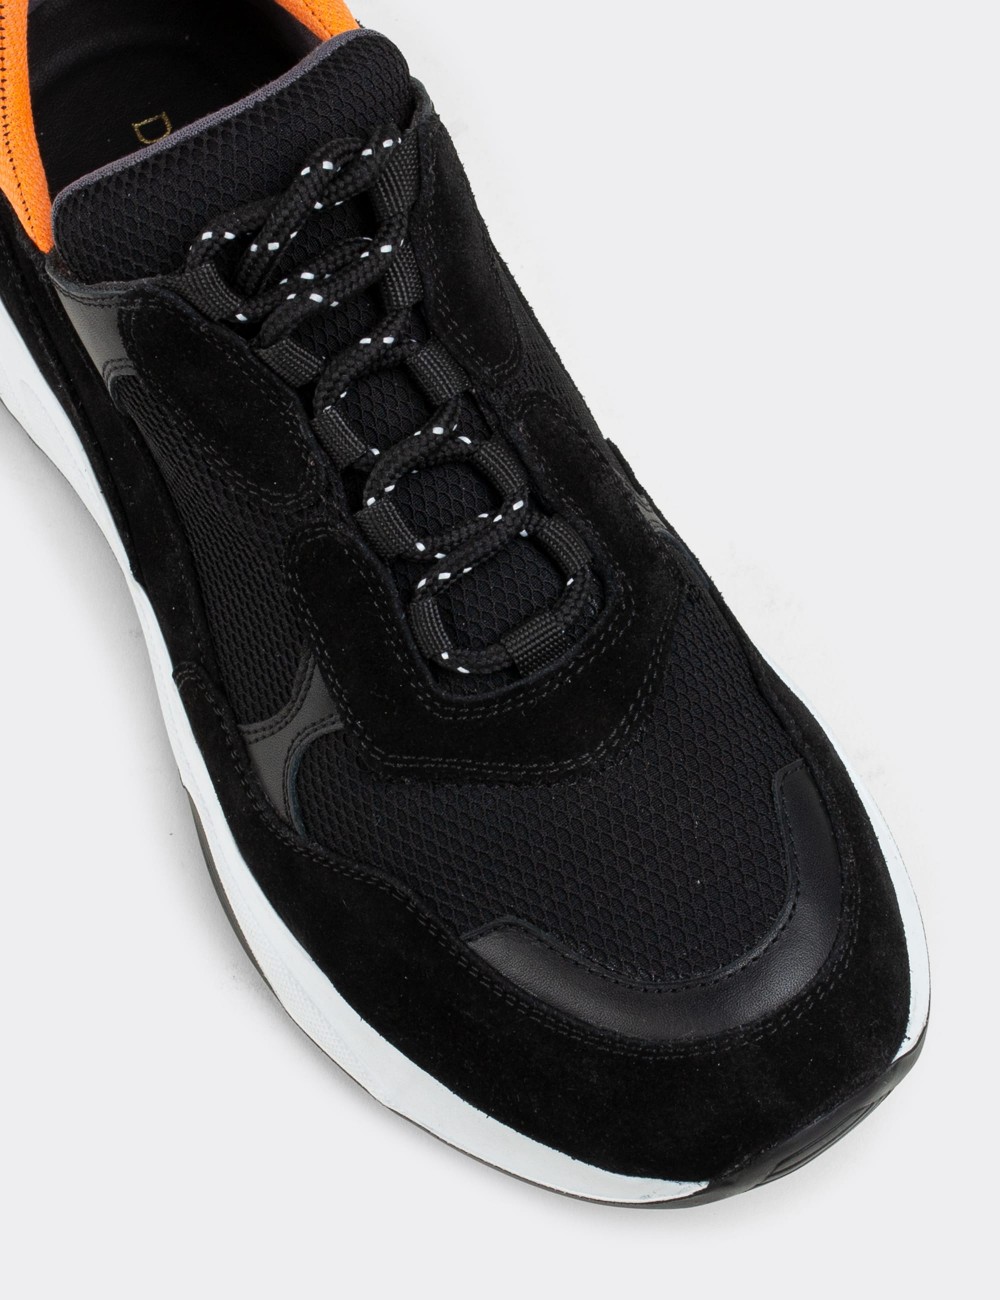 Black Suede Leather Sneakers - 01724MSYHE02